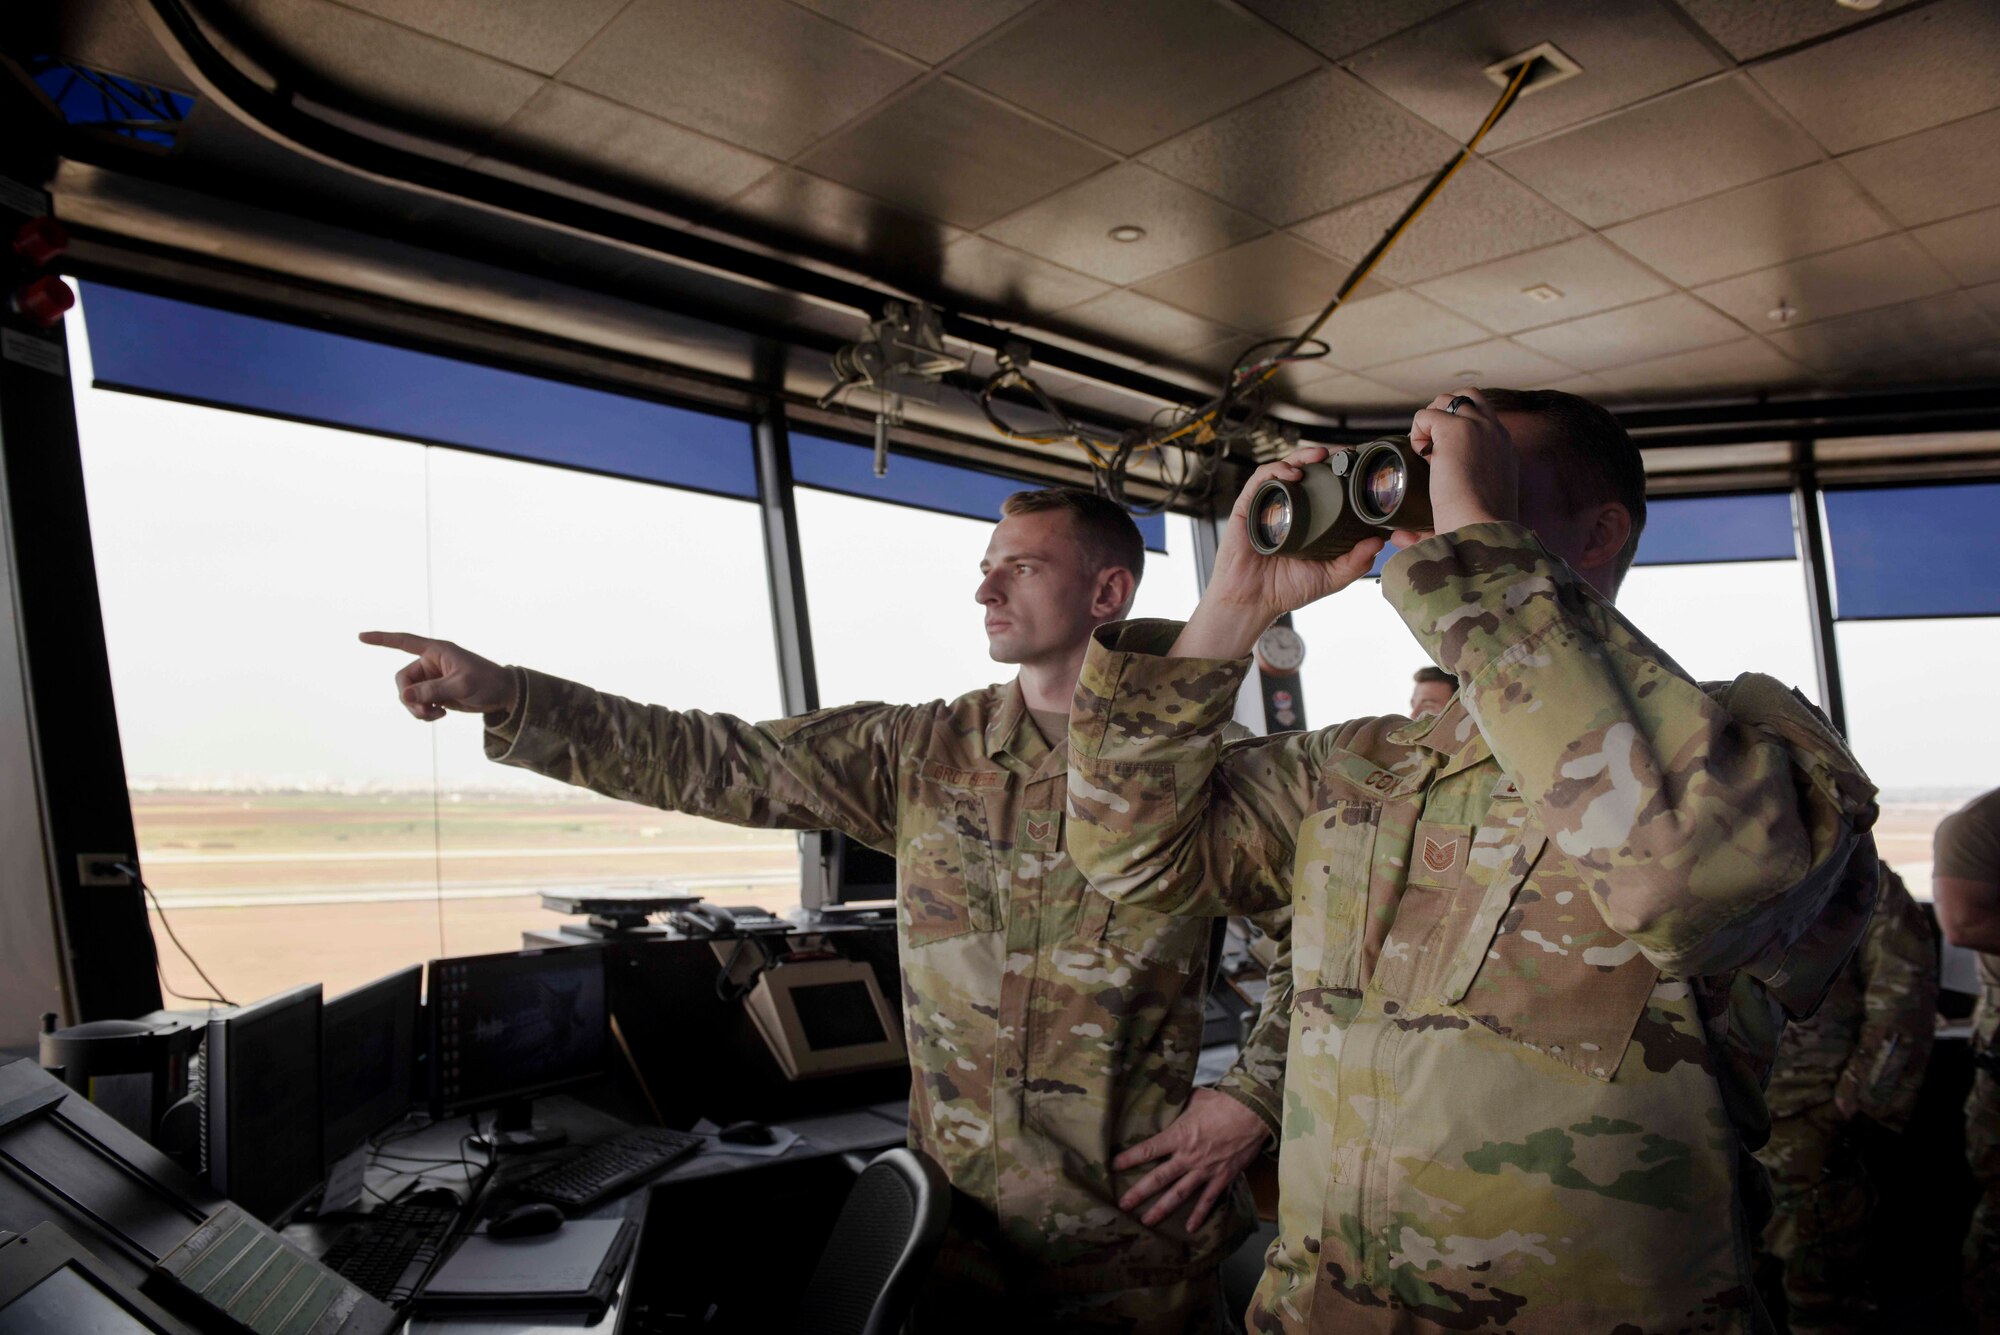 U.S. Air Force Staff Sgt. Garrett Grotheer (left), and Tech. Sgt. Todd Cox, 39th Operation Support Squadron air traffic controllers, monitor the airfield Nov. 25, 2019, at Incirlik Air Base, Turkey. The air traffic control tower and radar approach and control facility work together to ensure the safe direction of traffic in their respective airspaces. (U.S. Air Force photo by Staff Sgt. Joshua Magbanua)